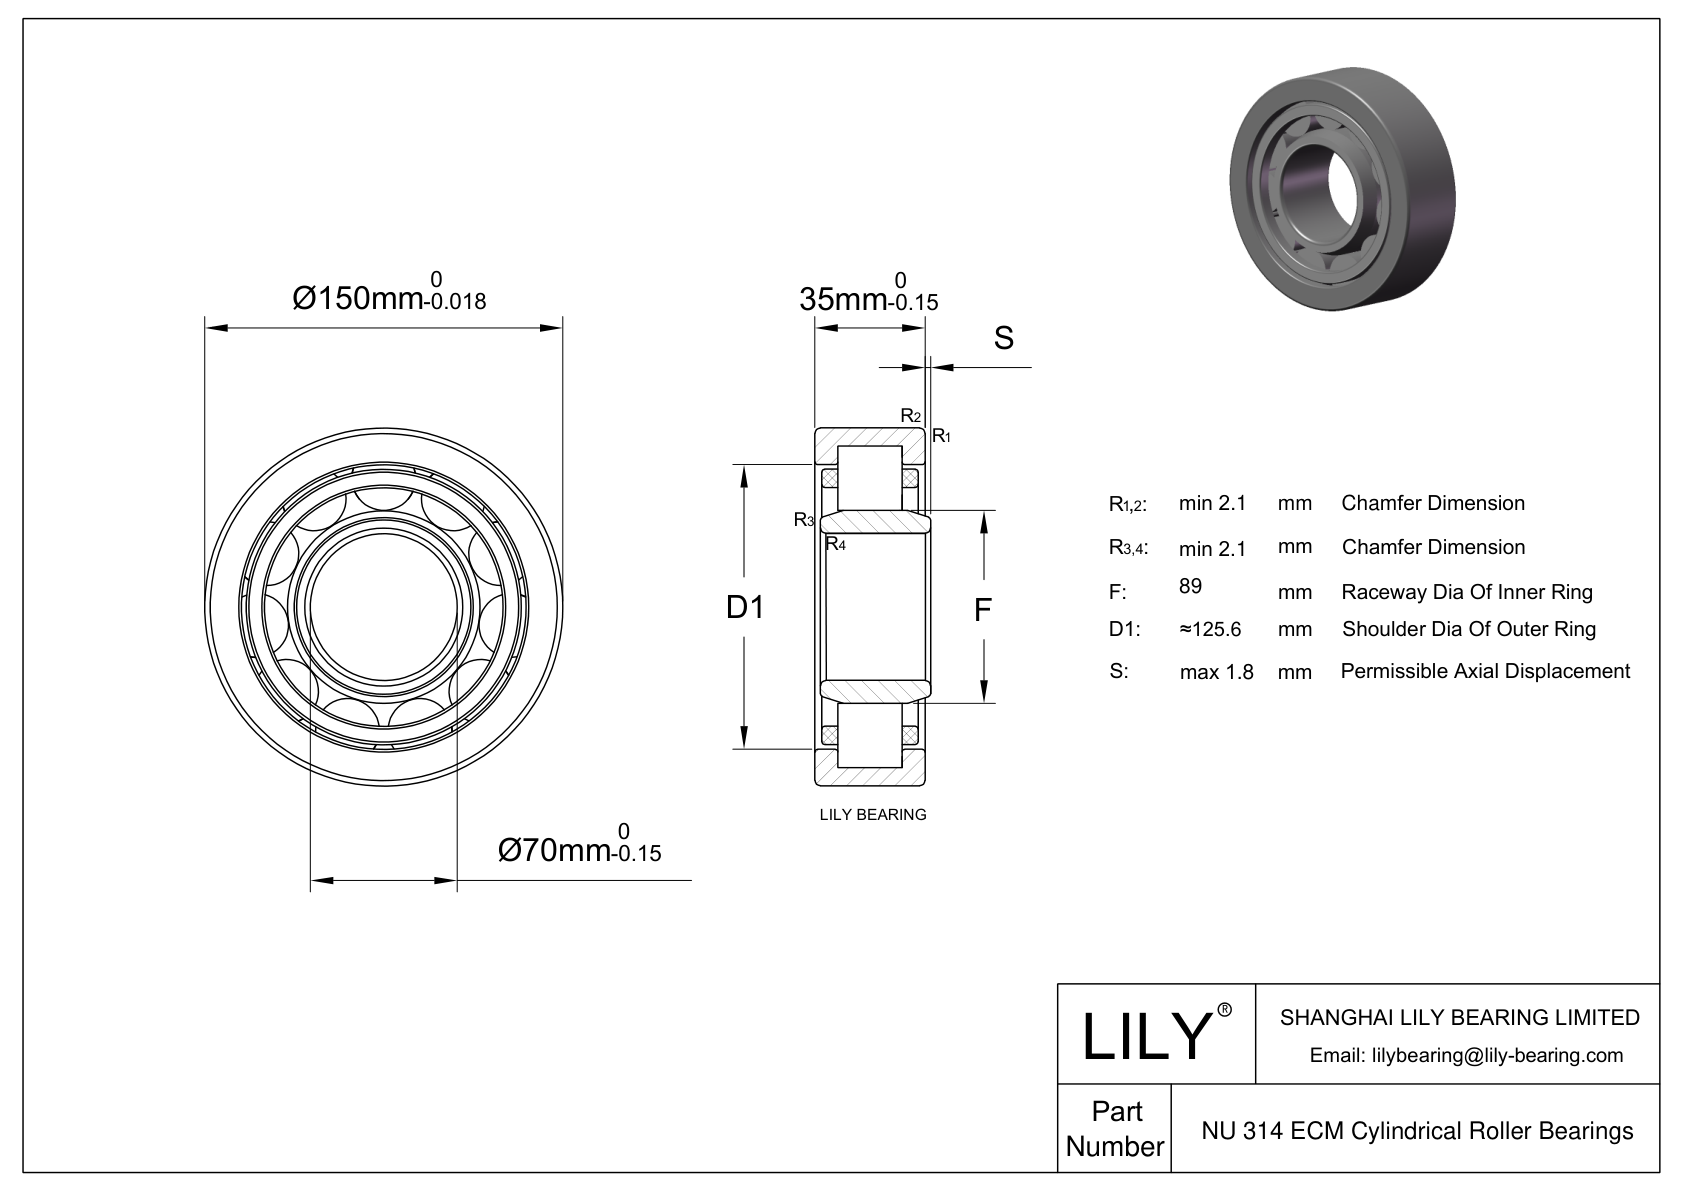 NU 314 ECM/C3VL0241 Ceramic Coated Cylindrical Roller Bearings cad drawing